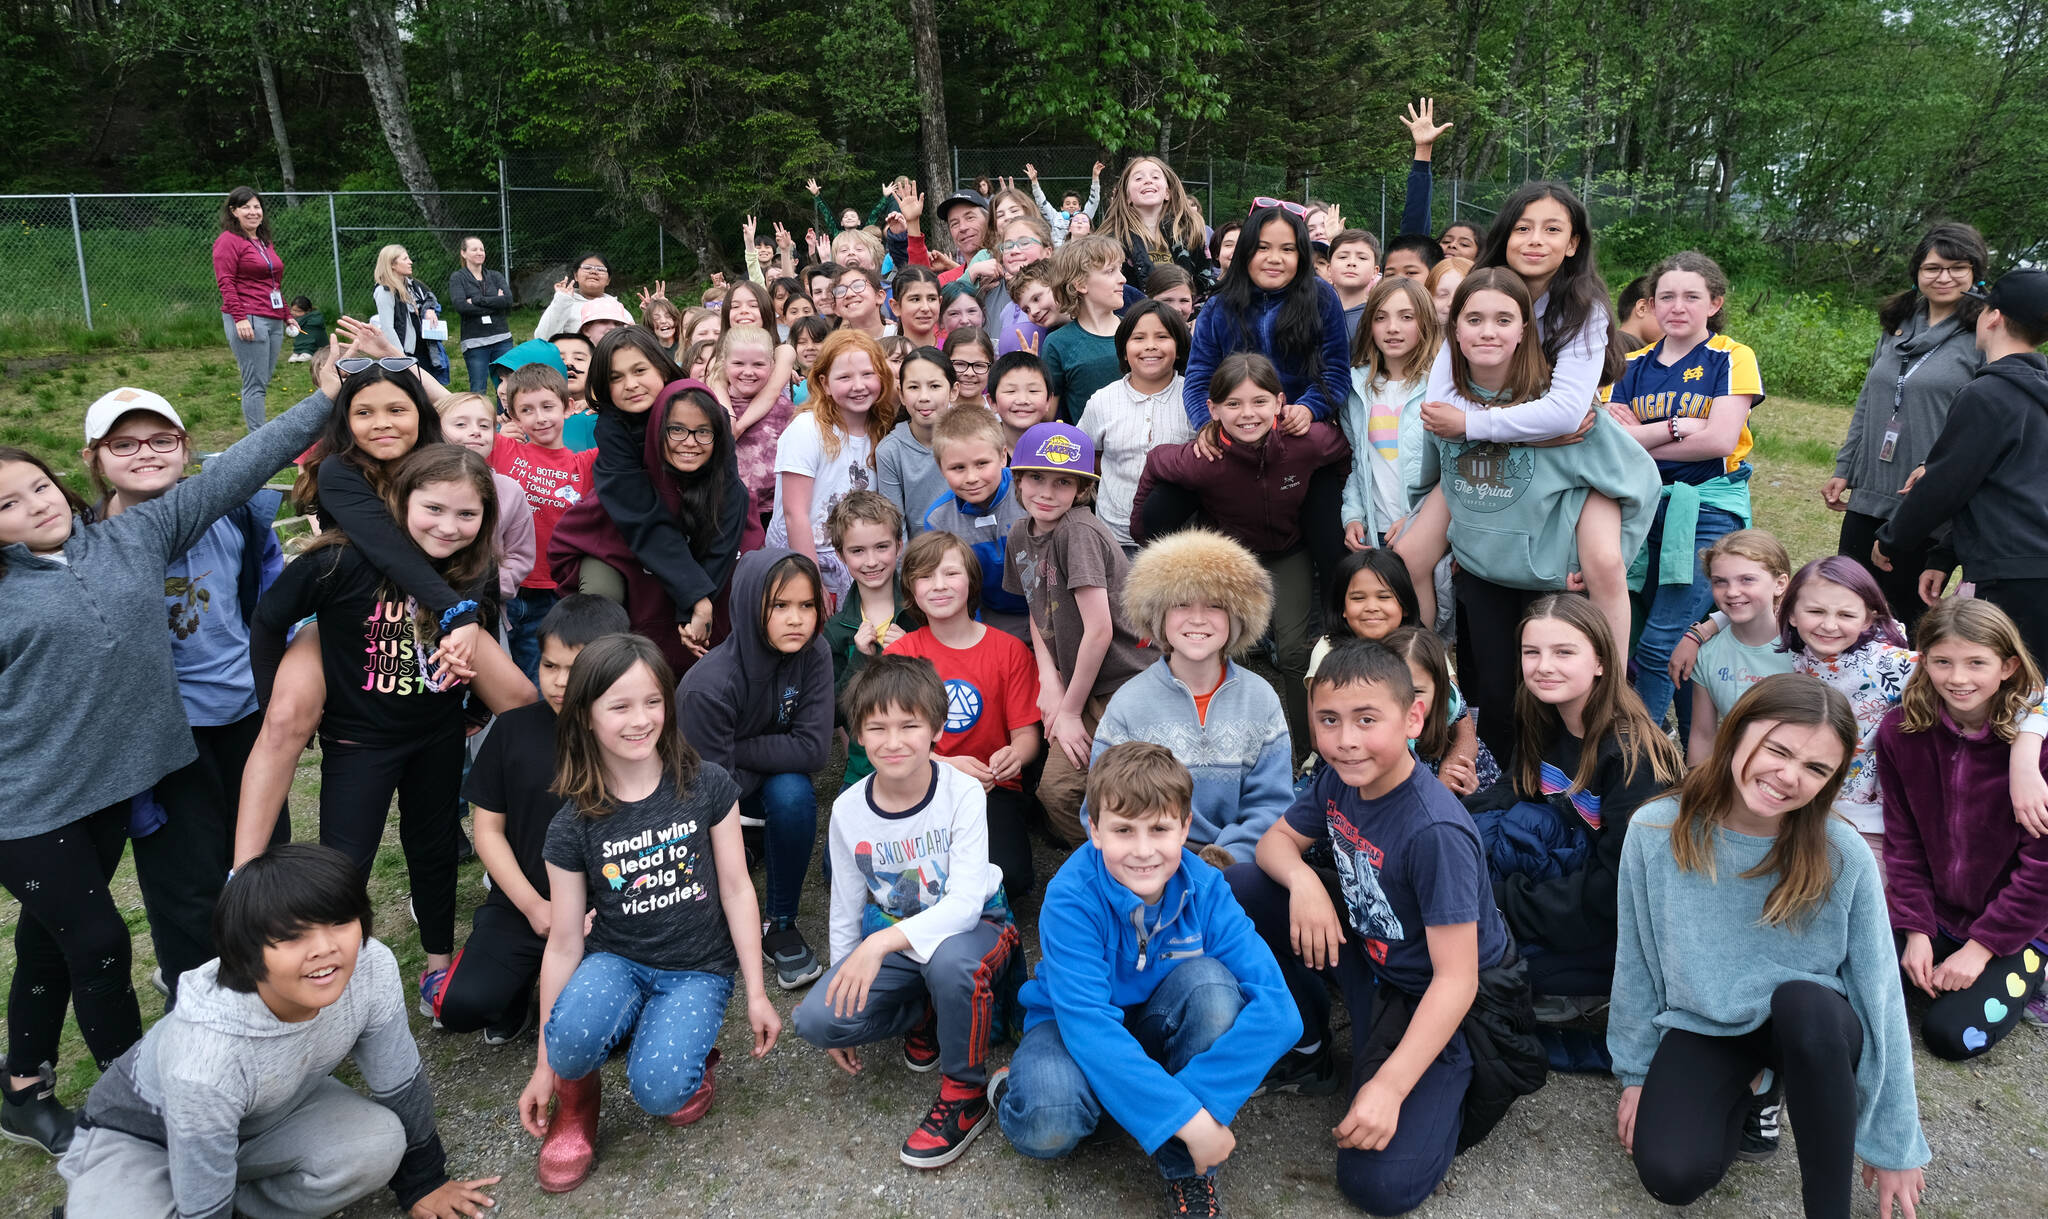 Sayéik: Gastineau Community School students pose with physical education teacher Dirk Miller, top middle, during Field Day at the school on Thursday. Miller is retiring after 24 years at the school. (Klas Stolpe / Juneau Empire)